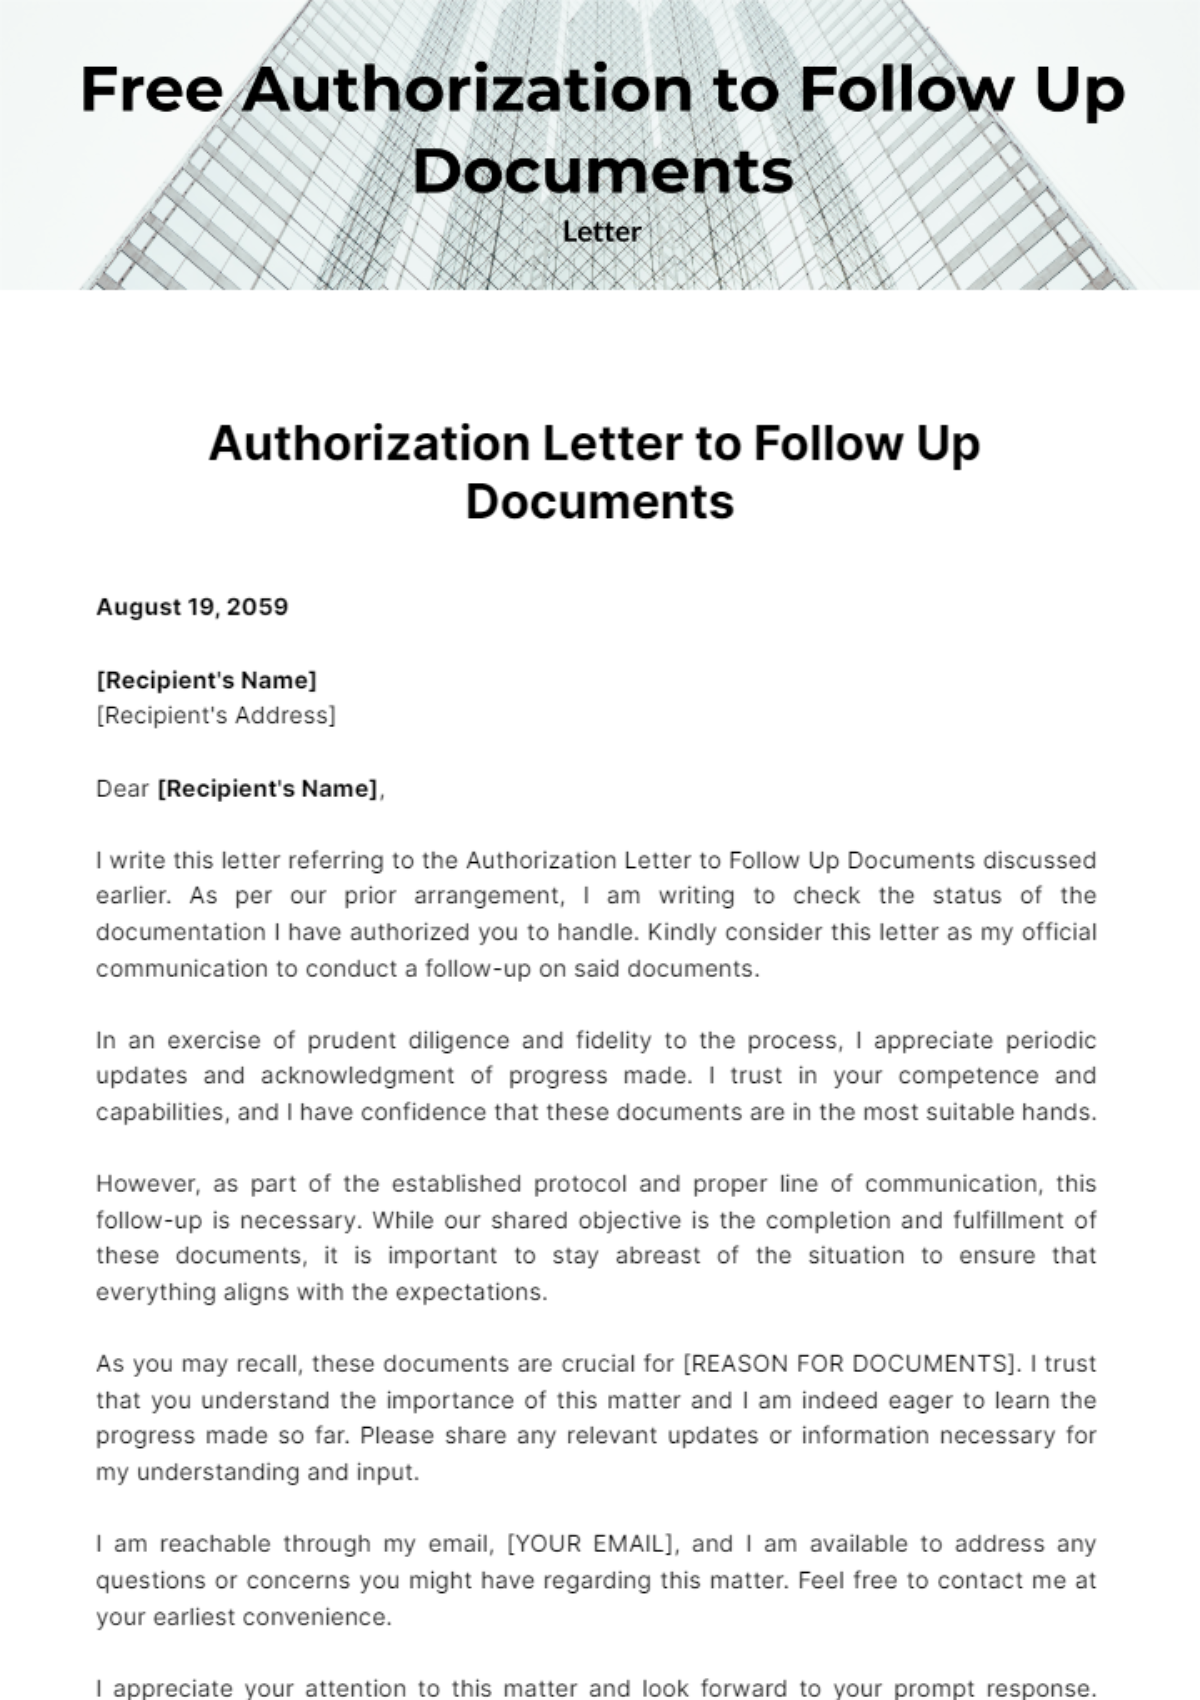 Free Authorization Letter to Follow Up Documents Template